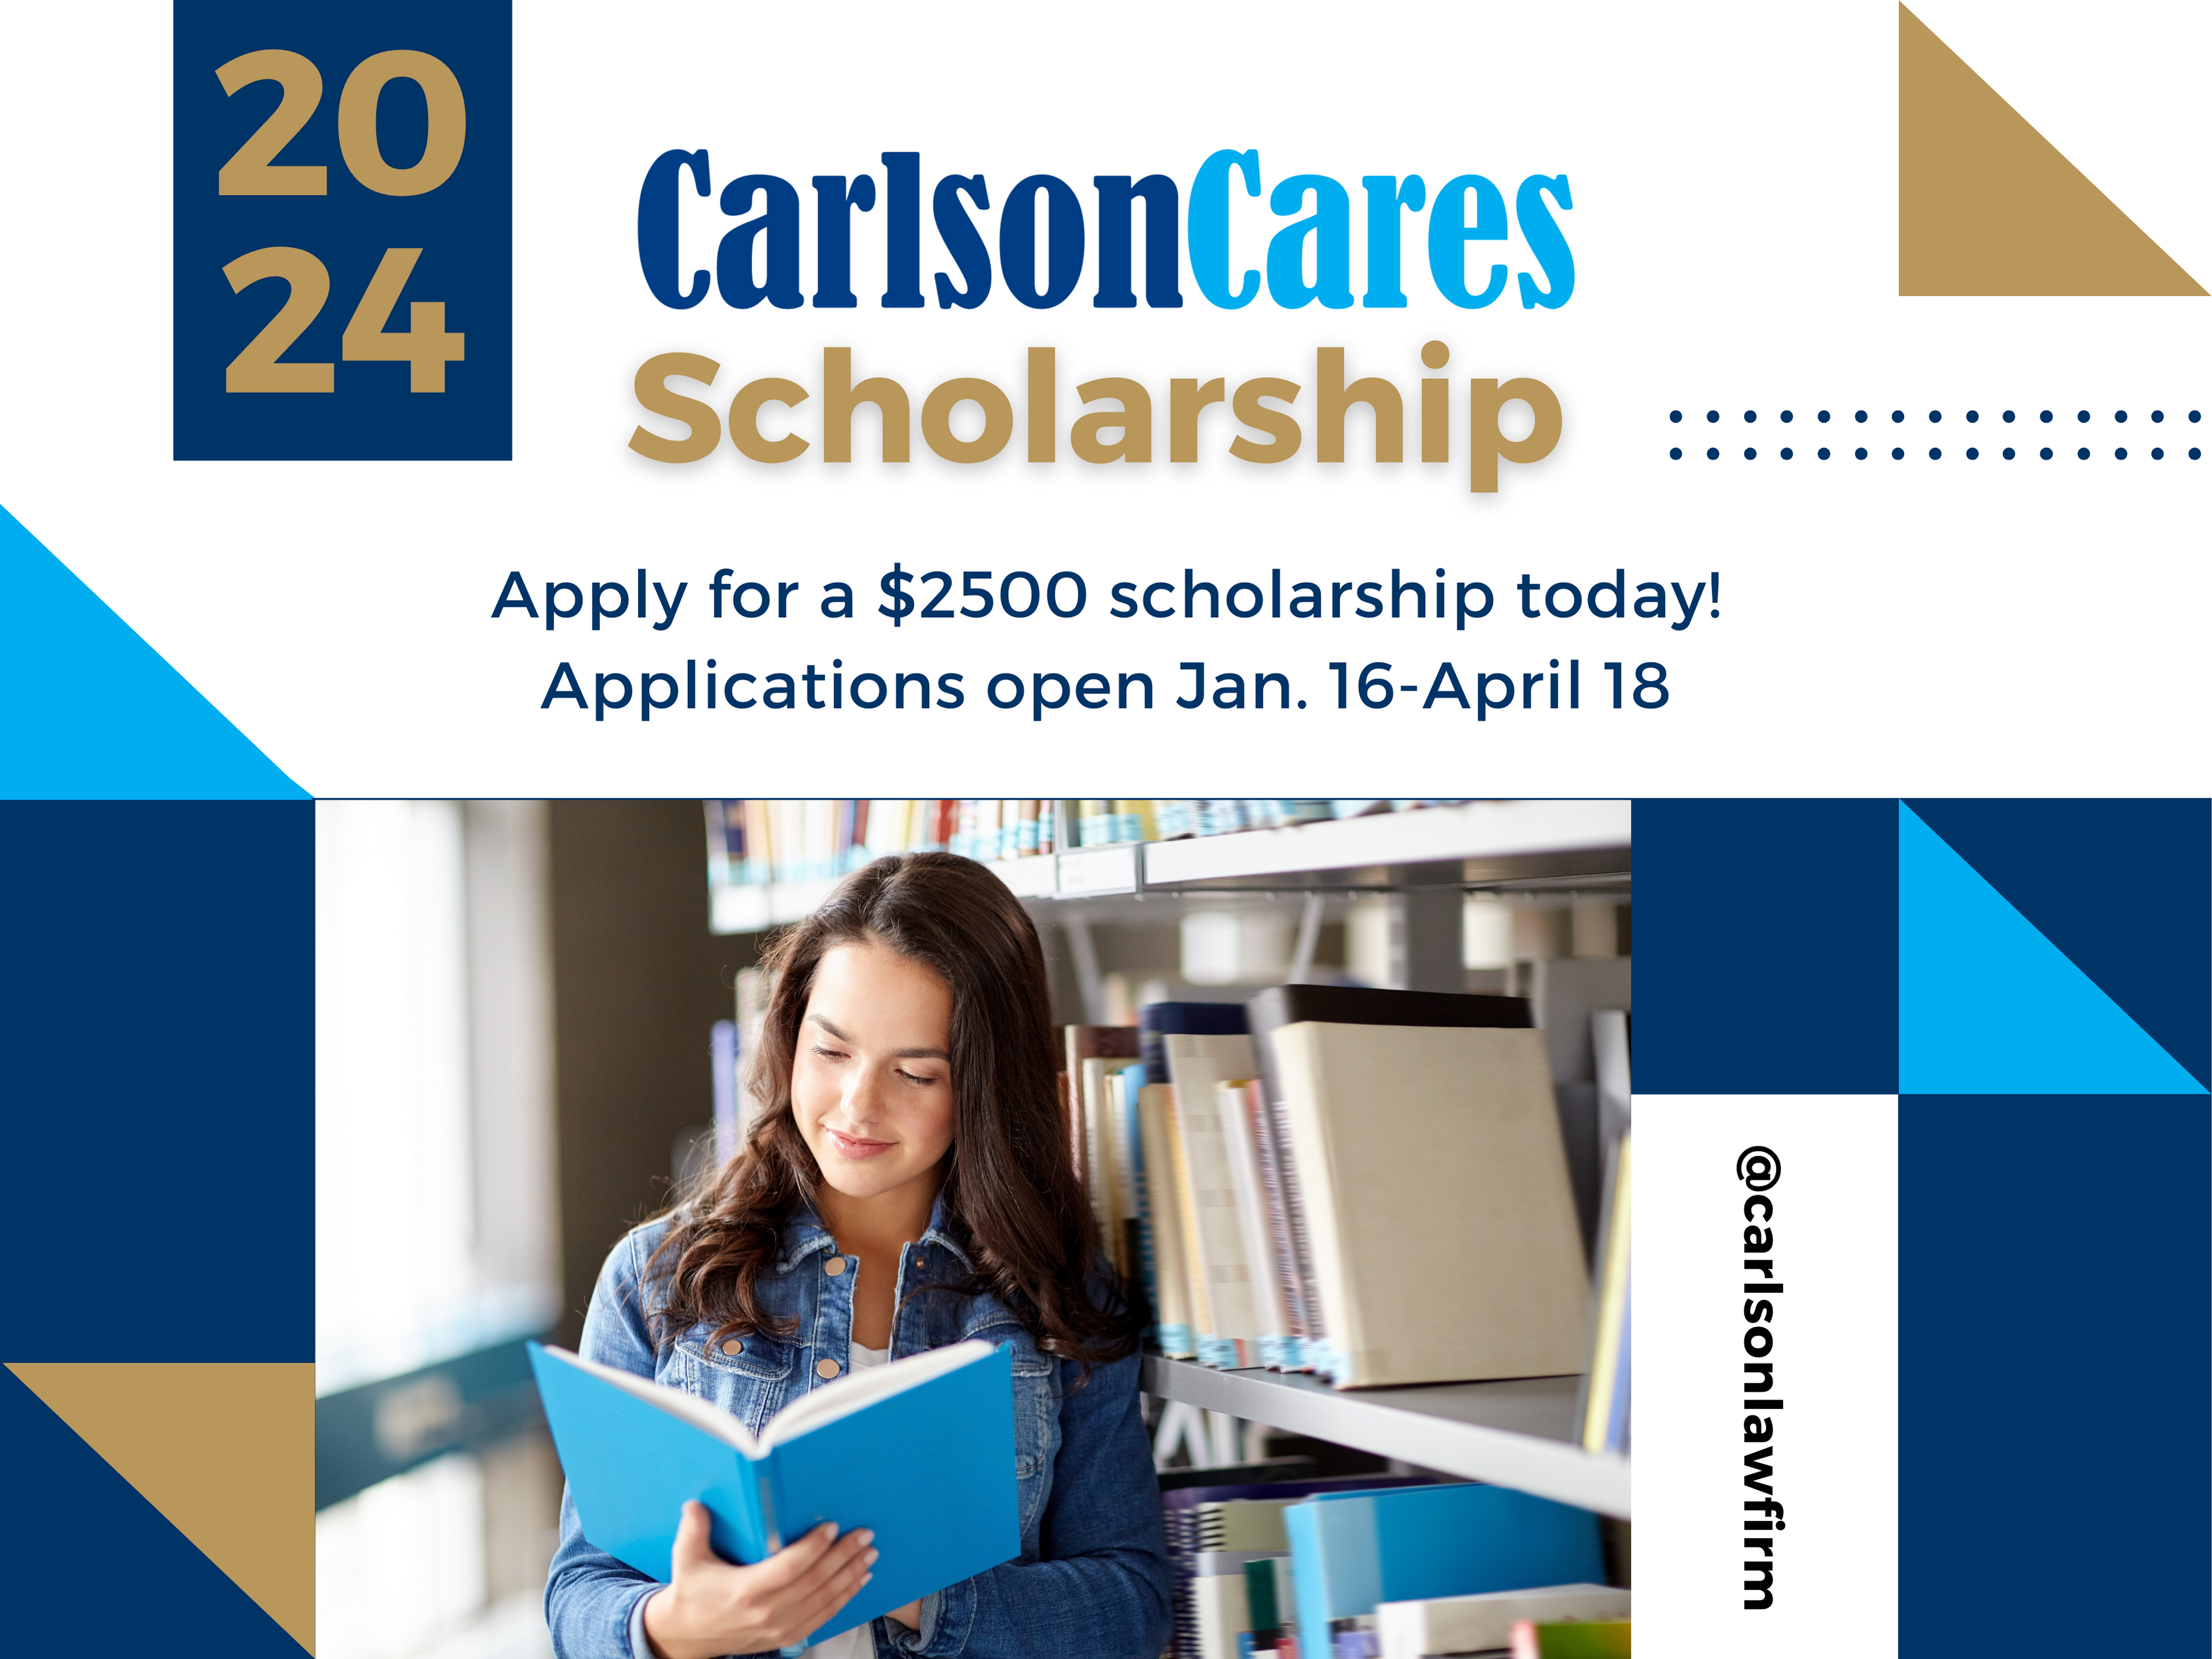 Carlson Cares Scholarship is a free scholarship worth 2,500.